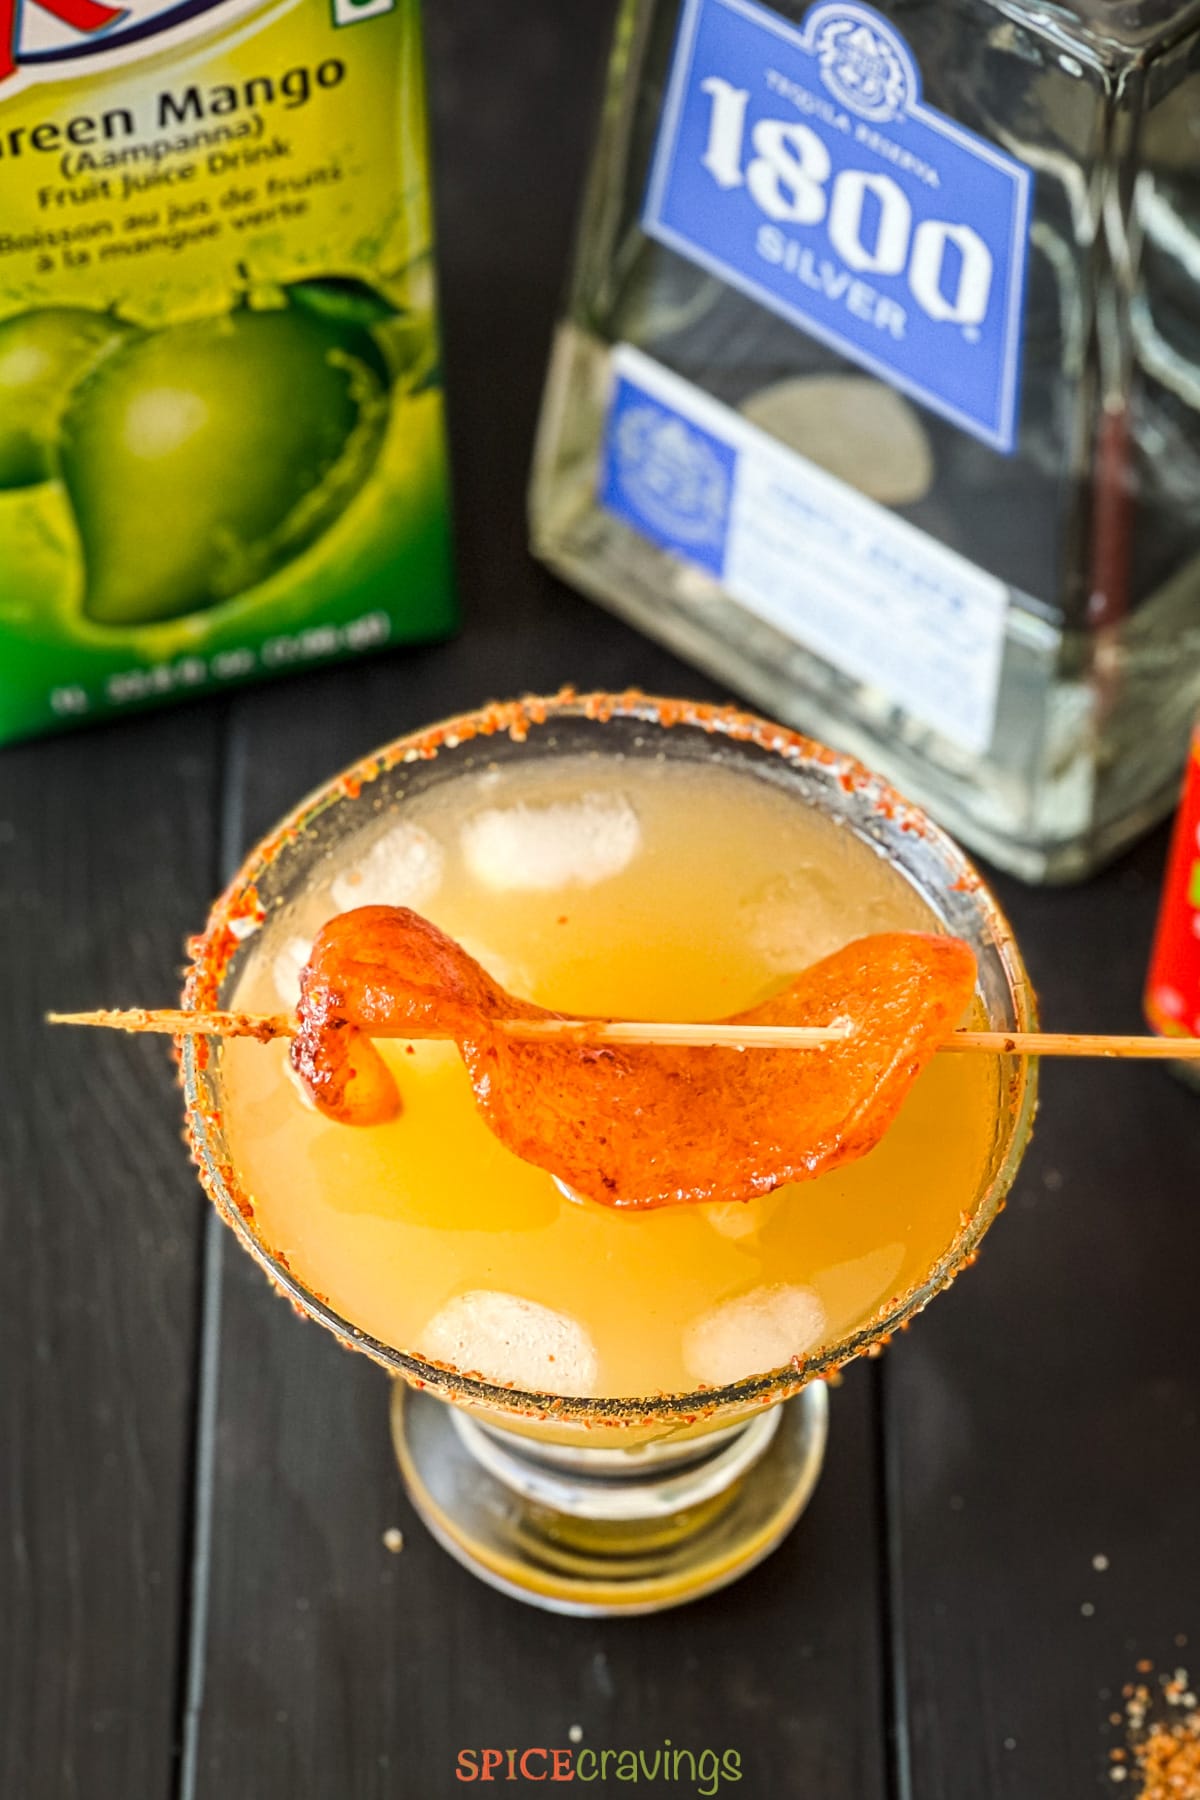 glass with spicy yellow drink topped with chili mango skewer